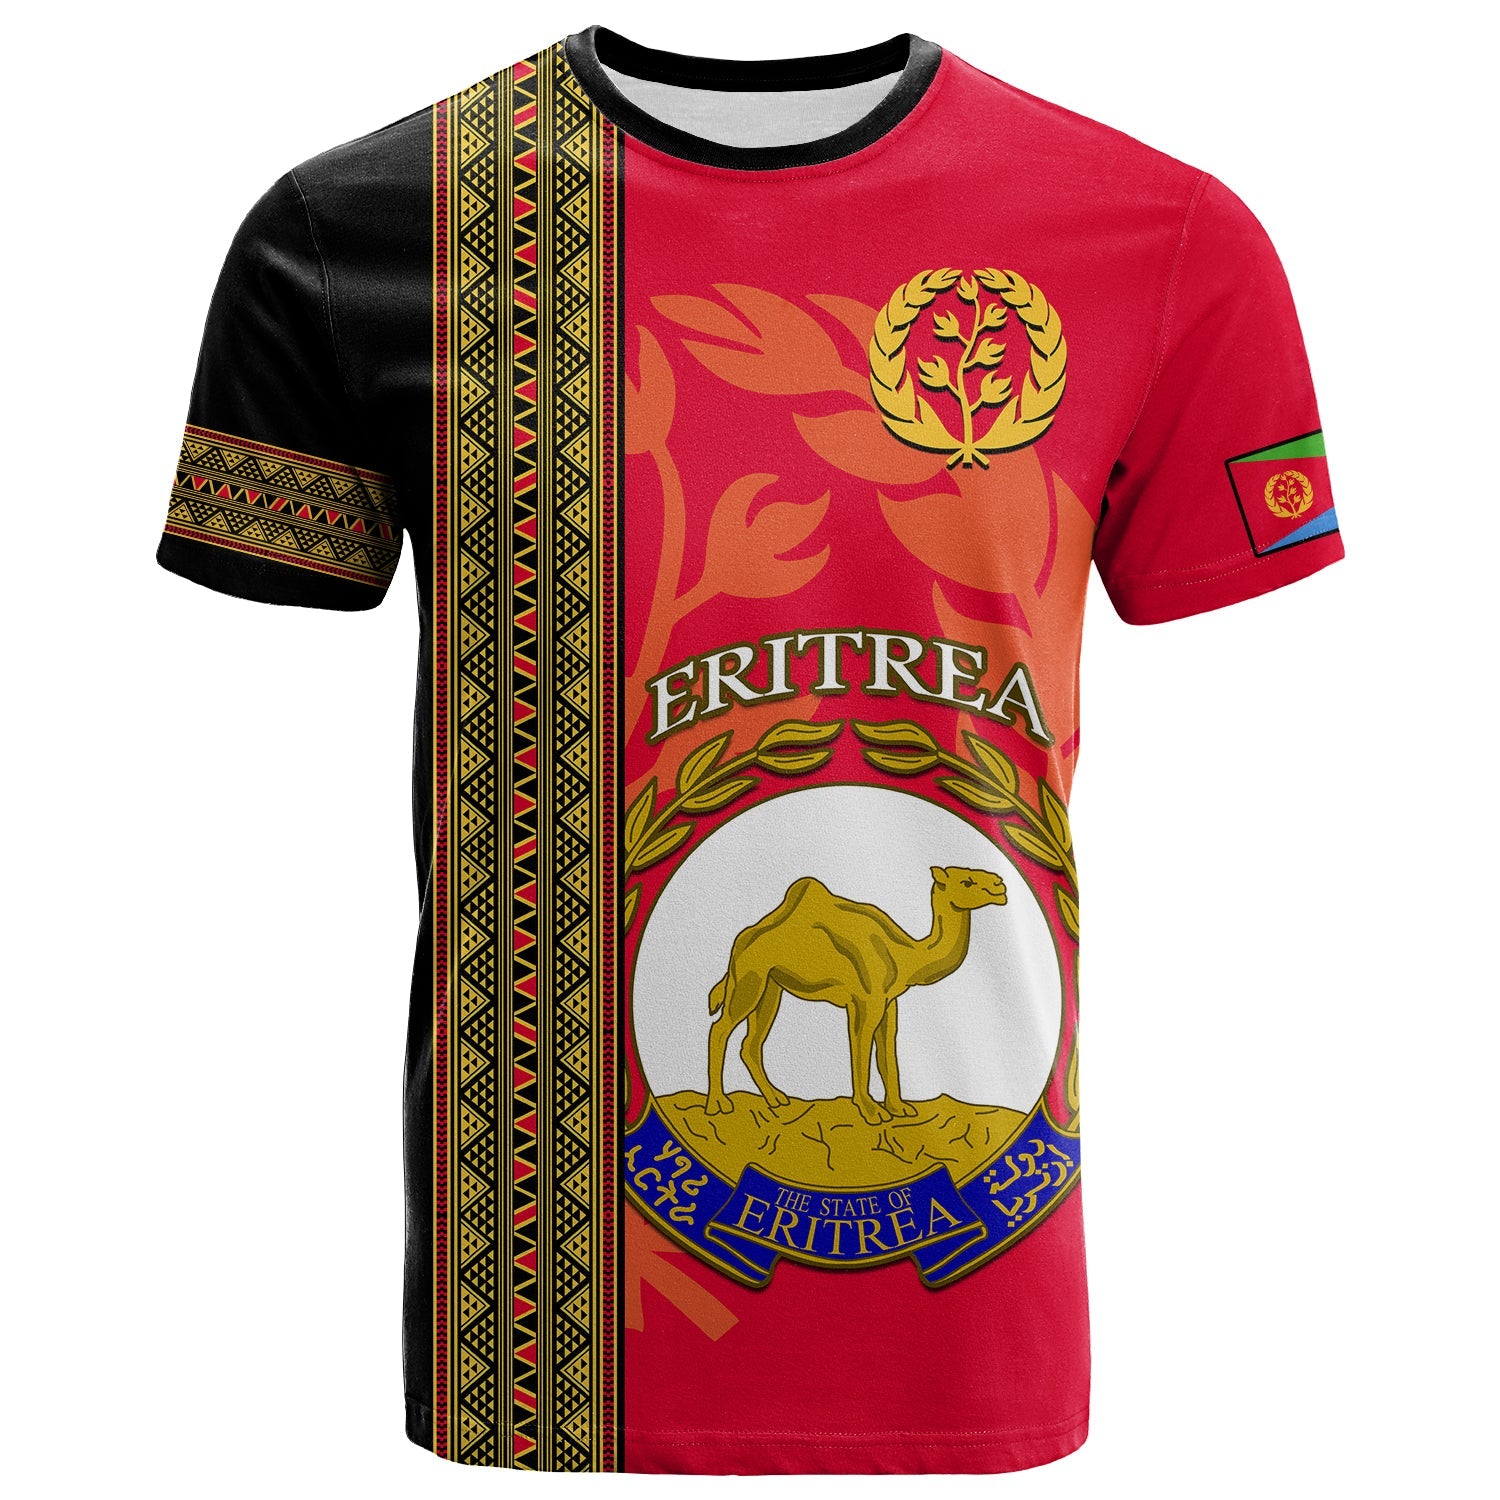 custom-personalised-eritrea-t-shirt-african-pattern-happy-independence-day-version-black